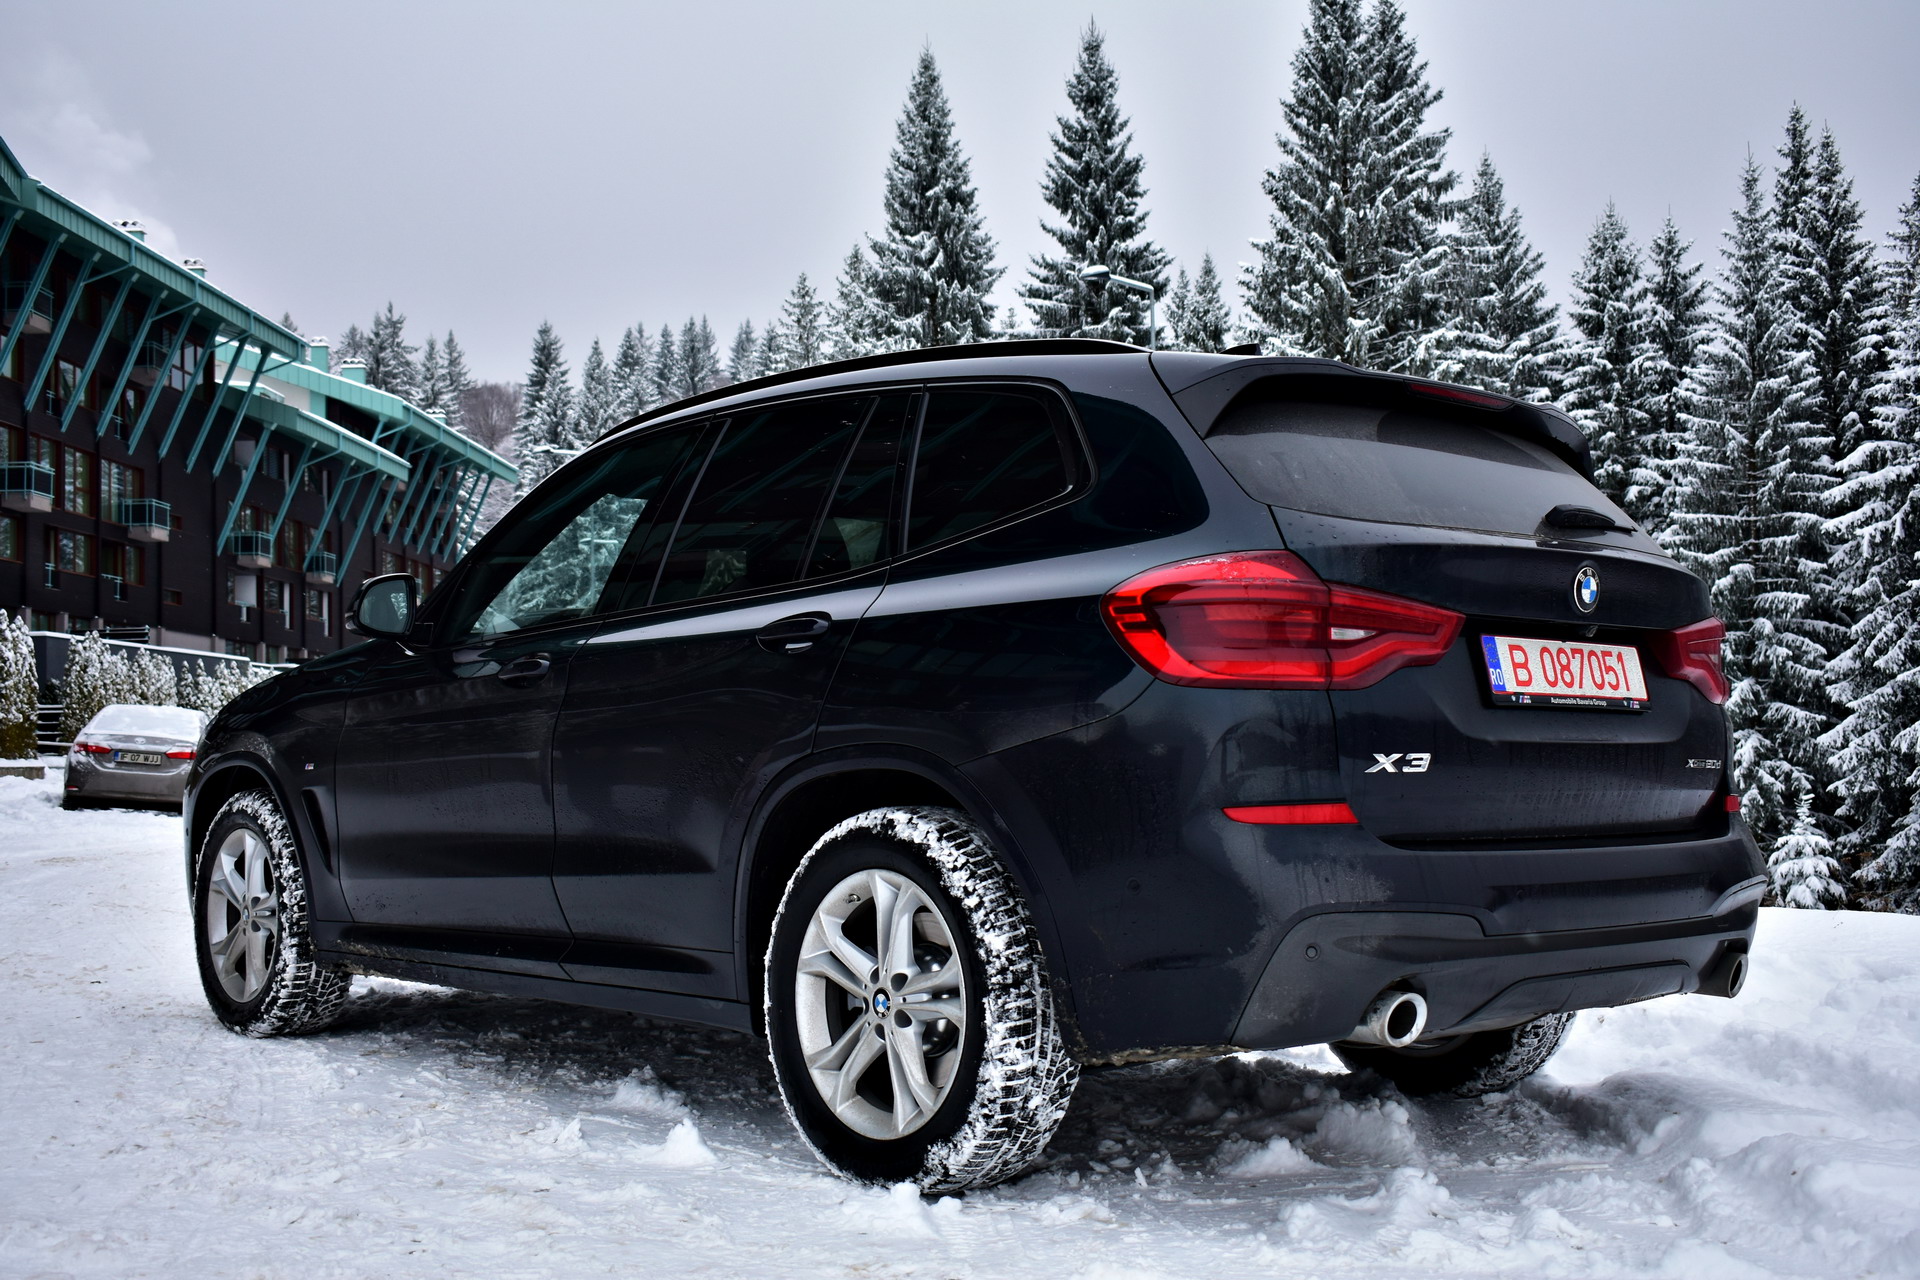 REVIEW: Is the BMW X3 still the best-in-class choice?